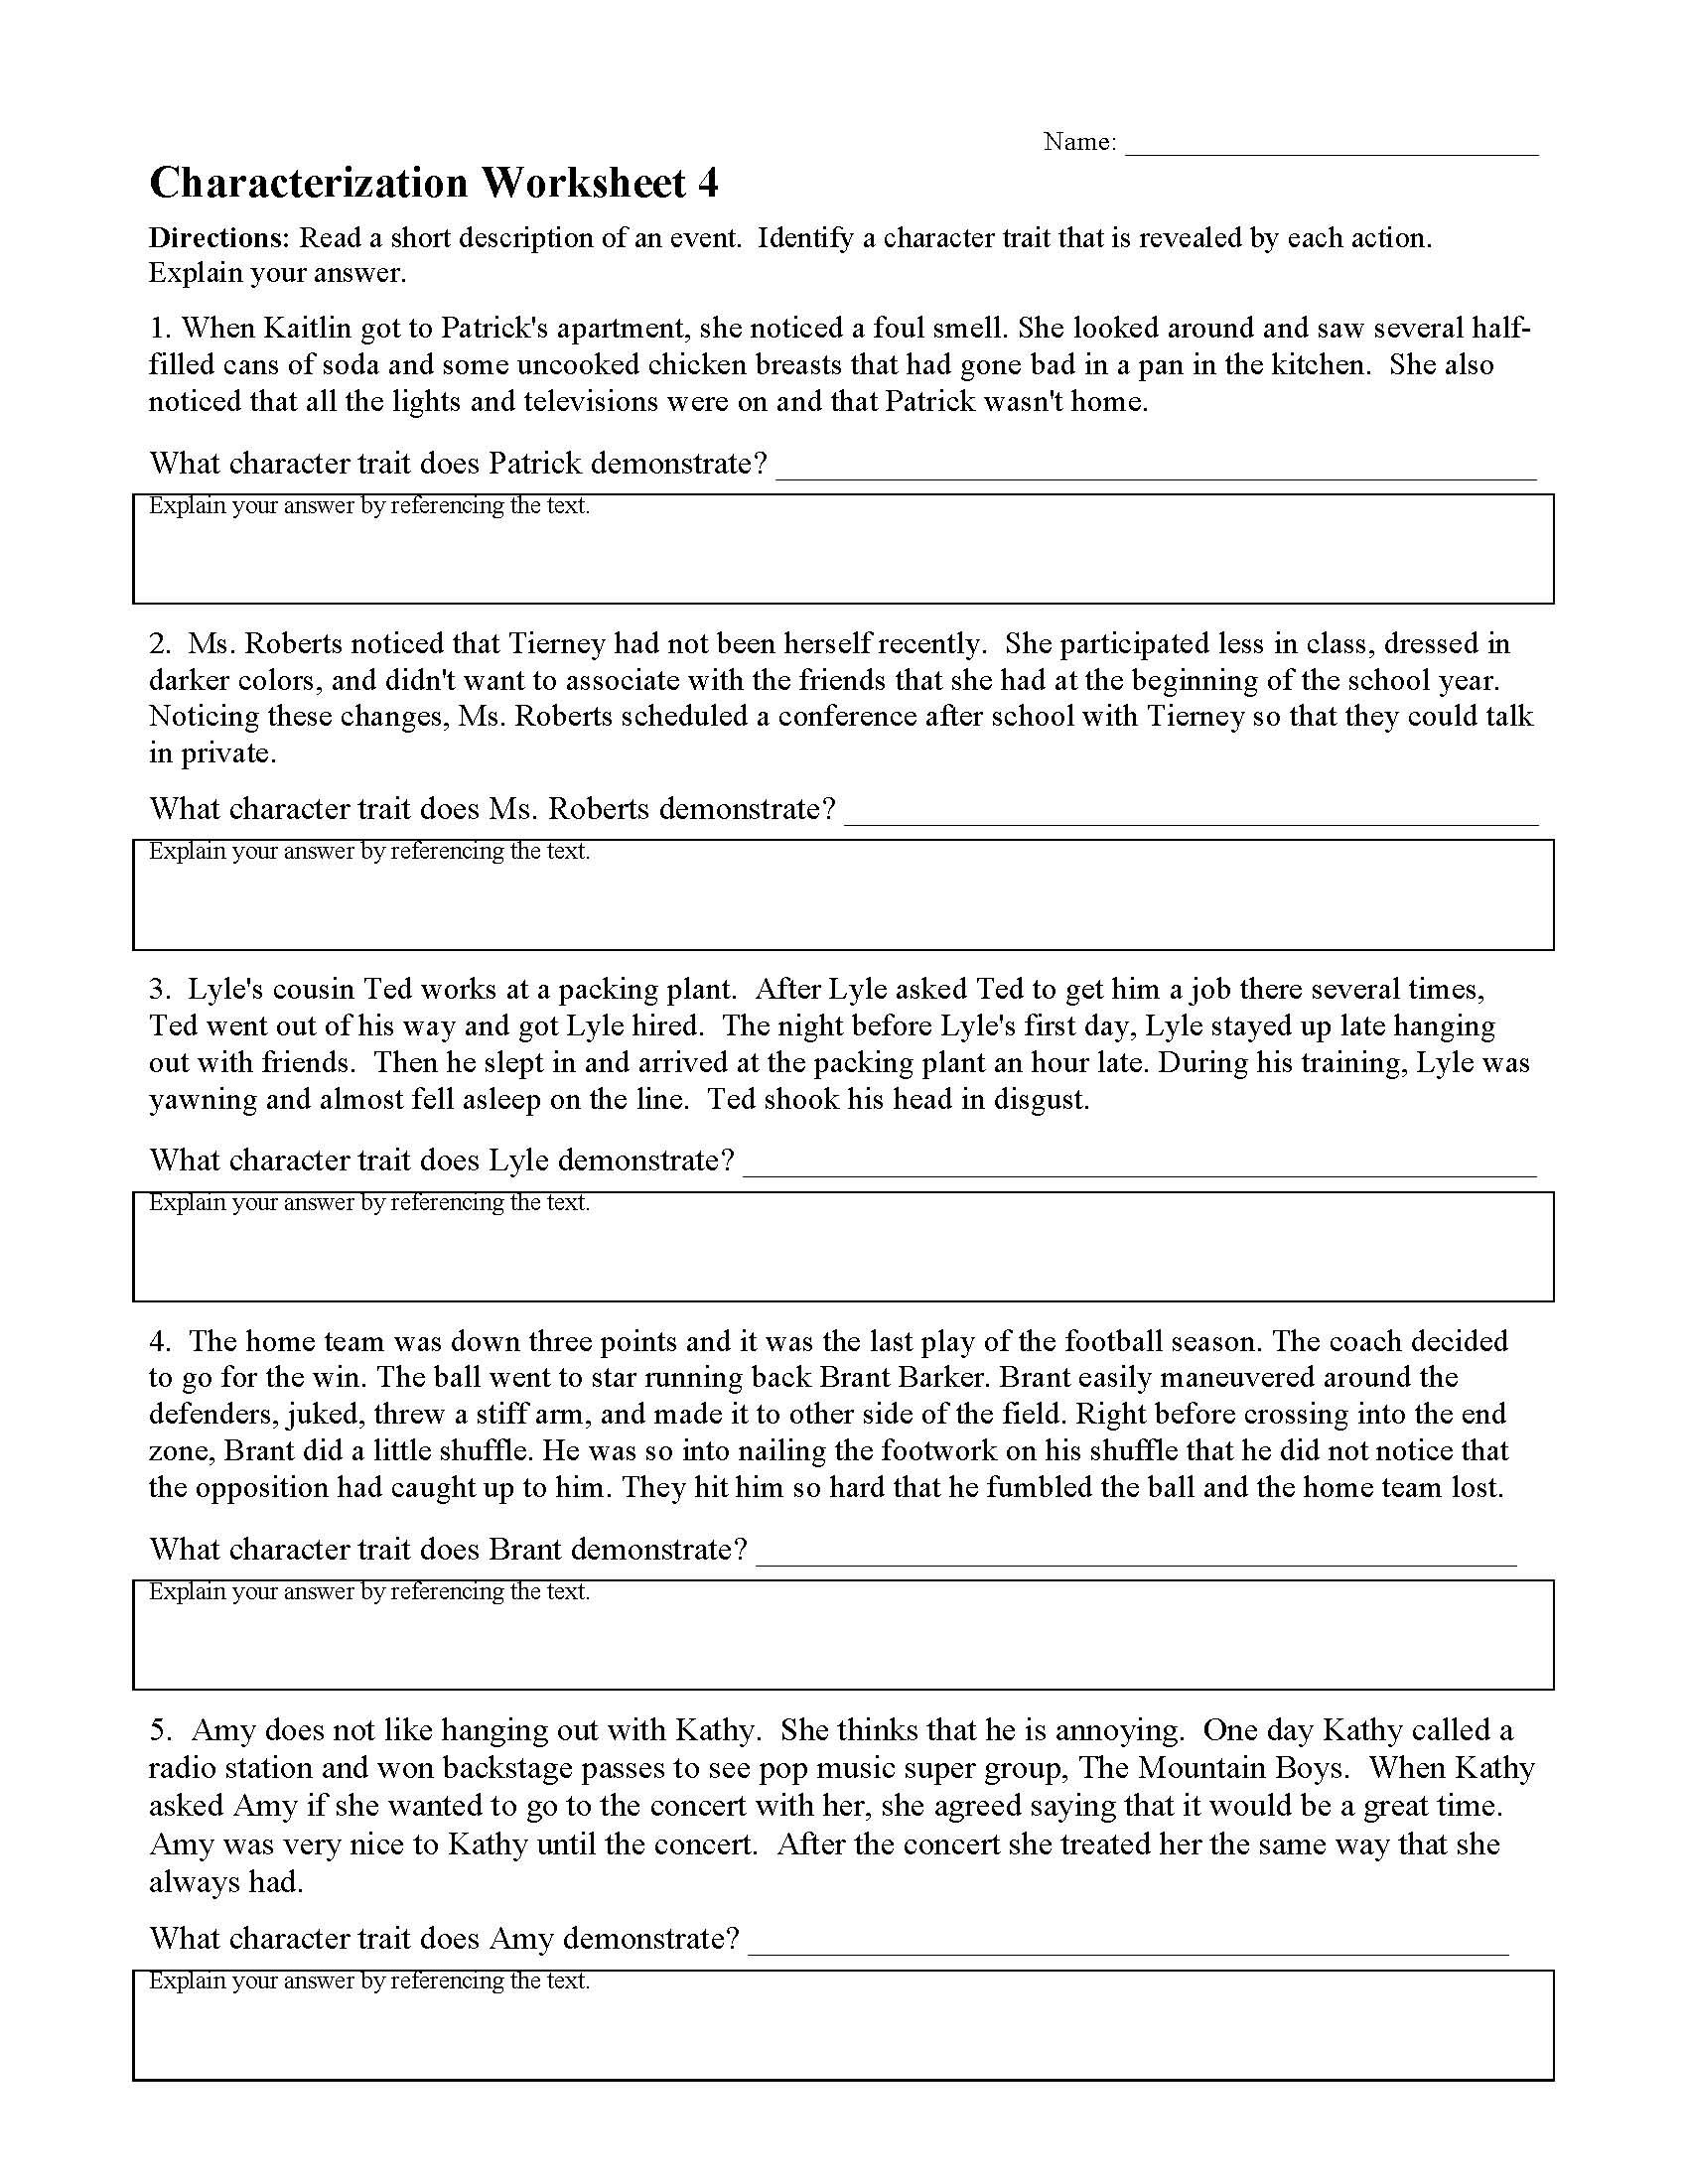 Characterization Worksheet 4 Preview